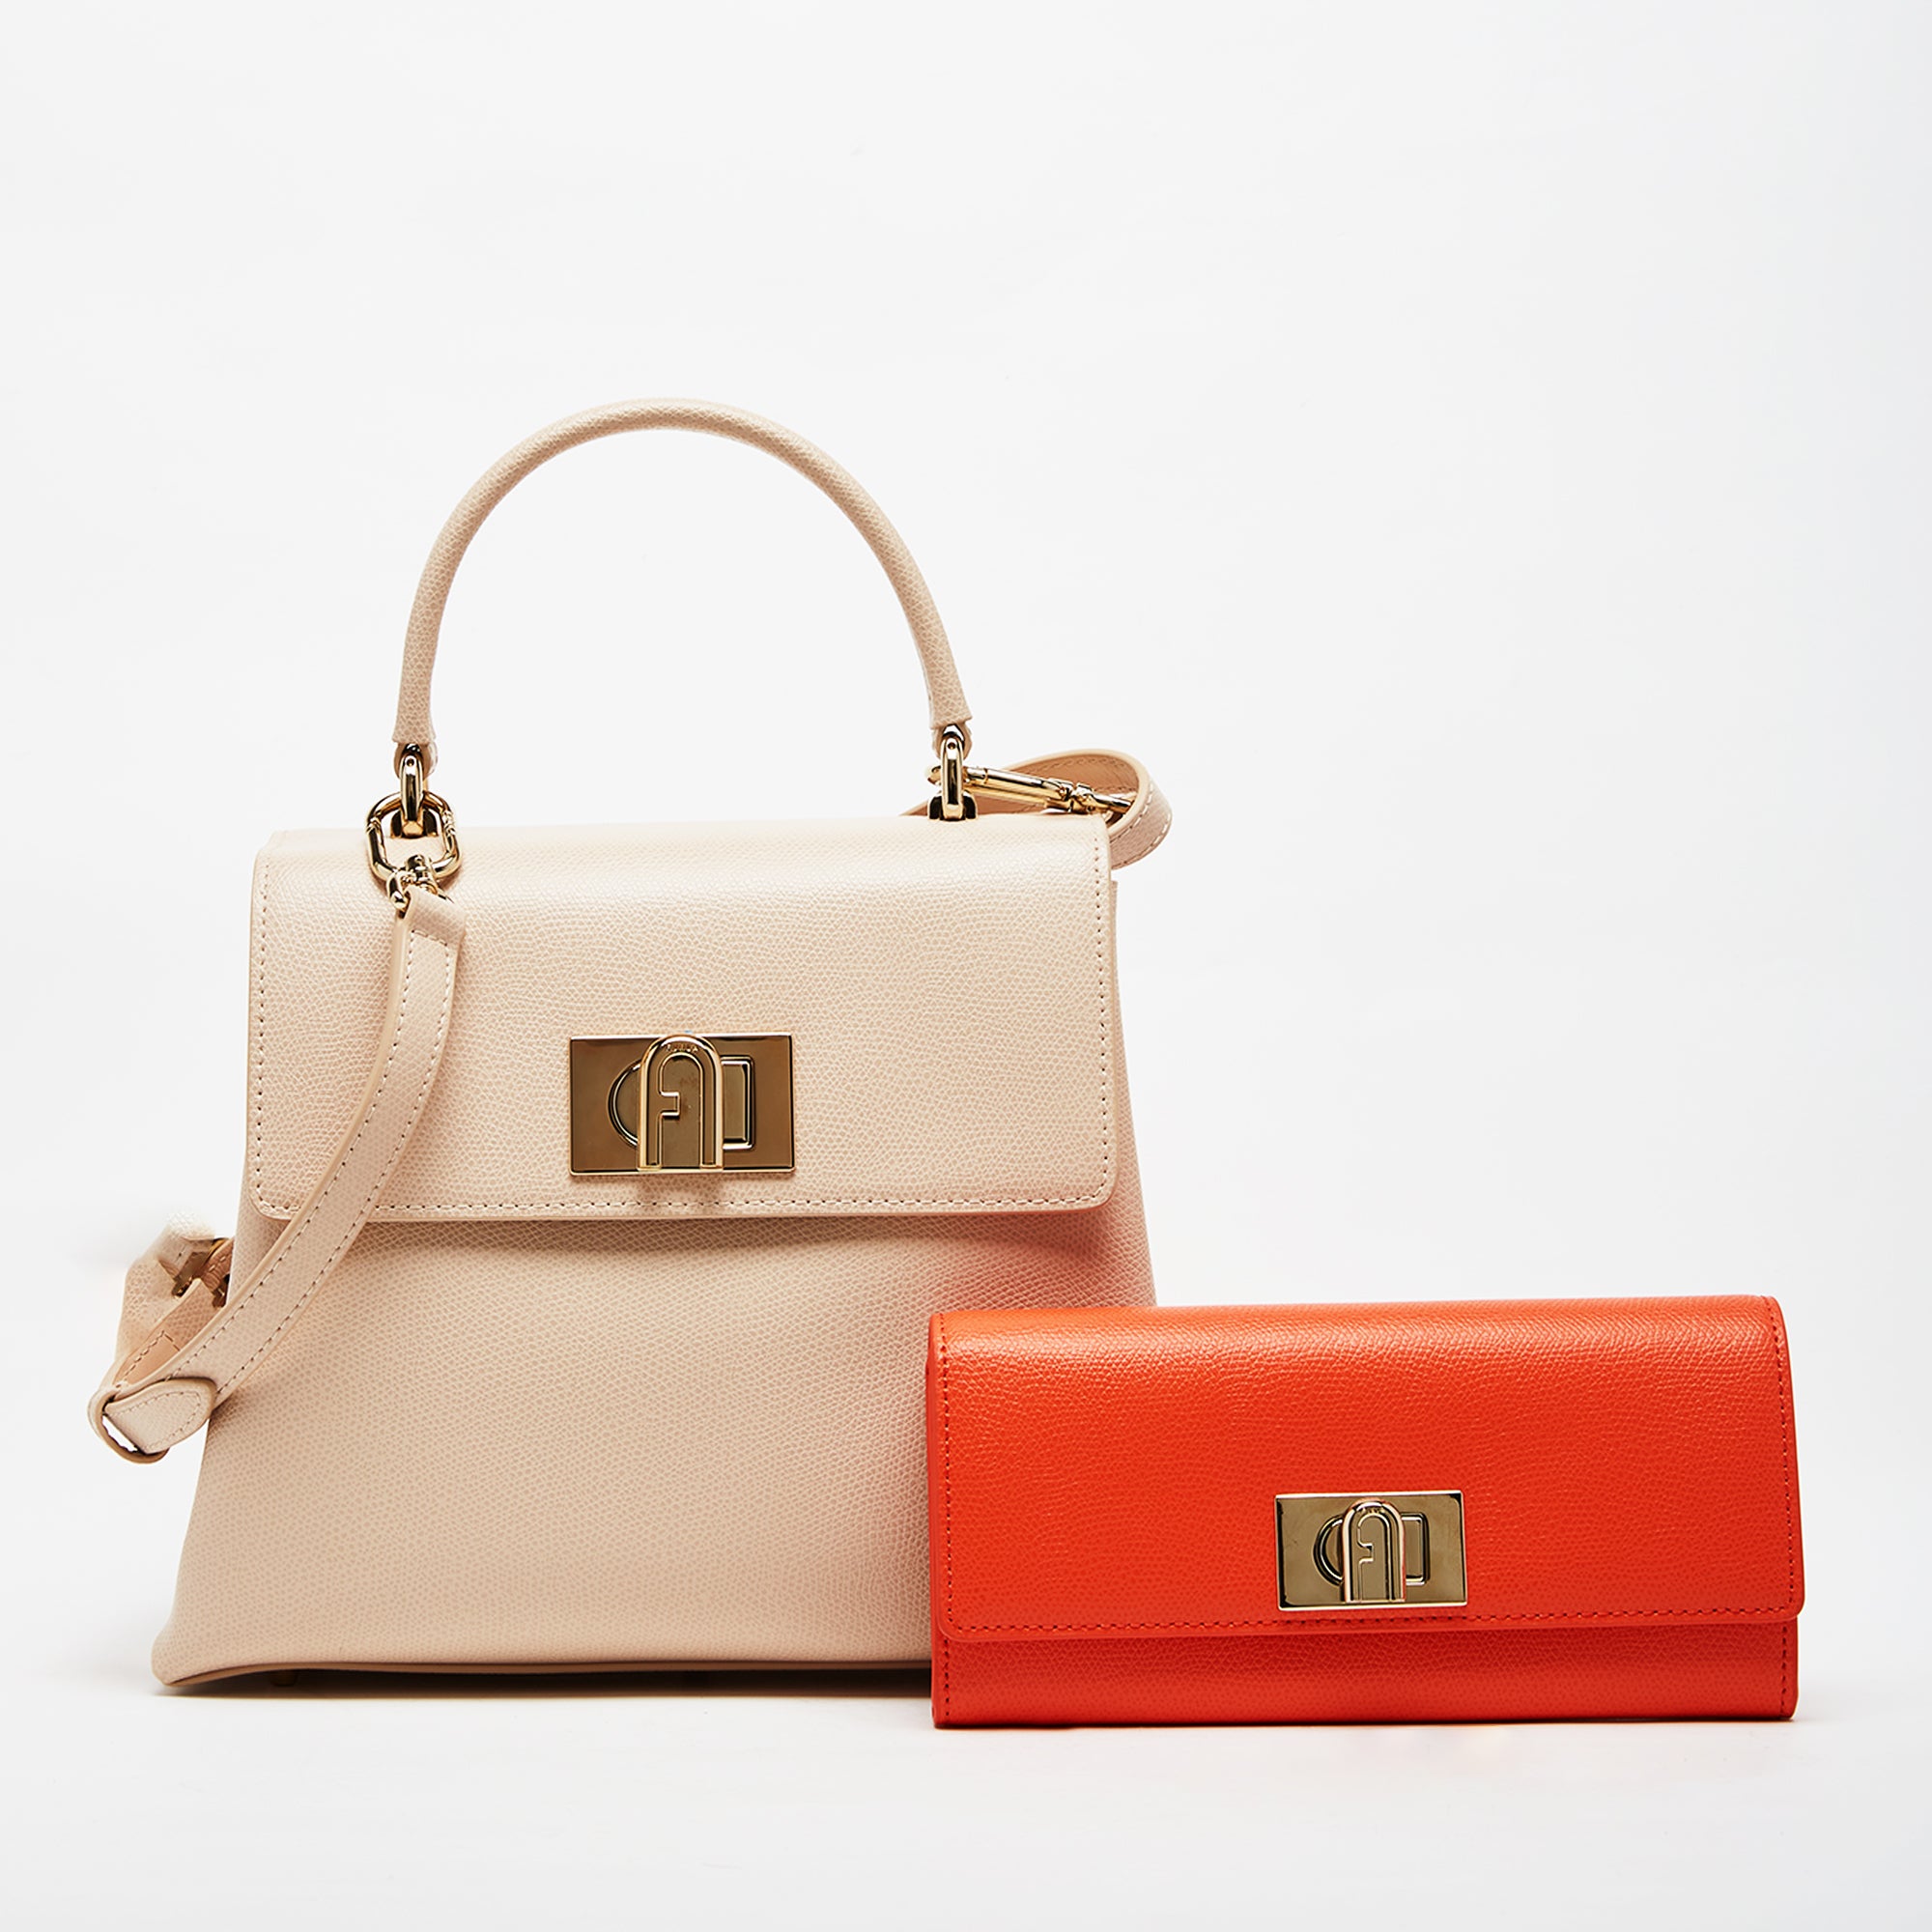 Furla 1927 Top Handle Bag with Continental Wallet Combo Ballerina I Clivia S One Size